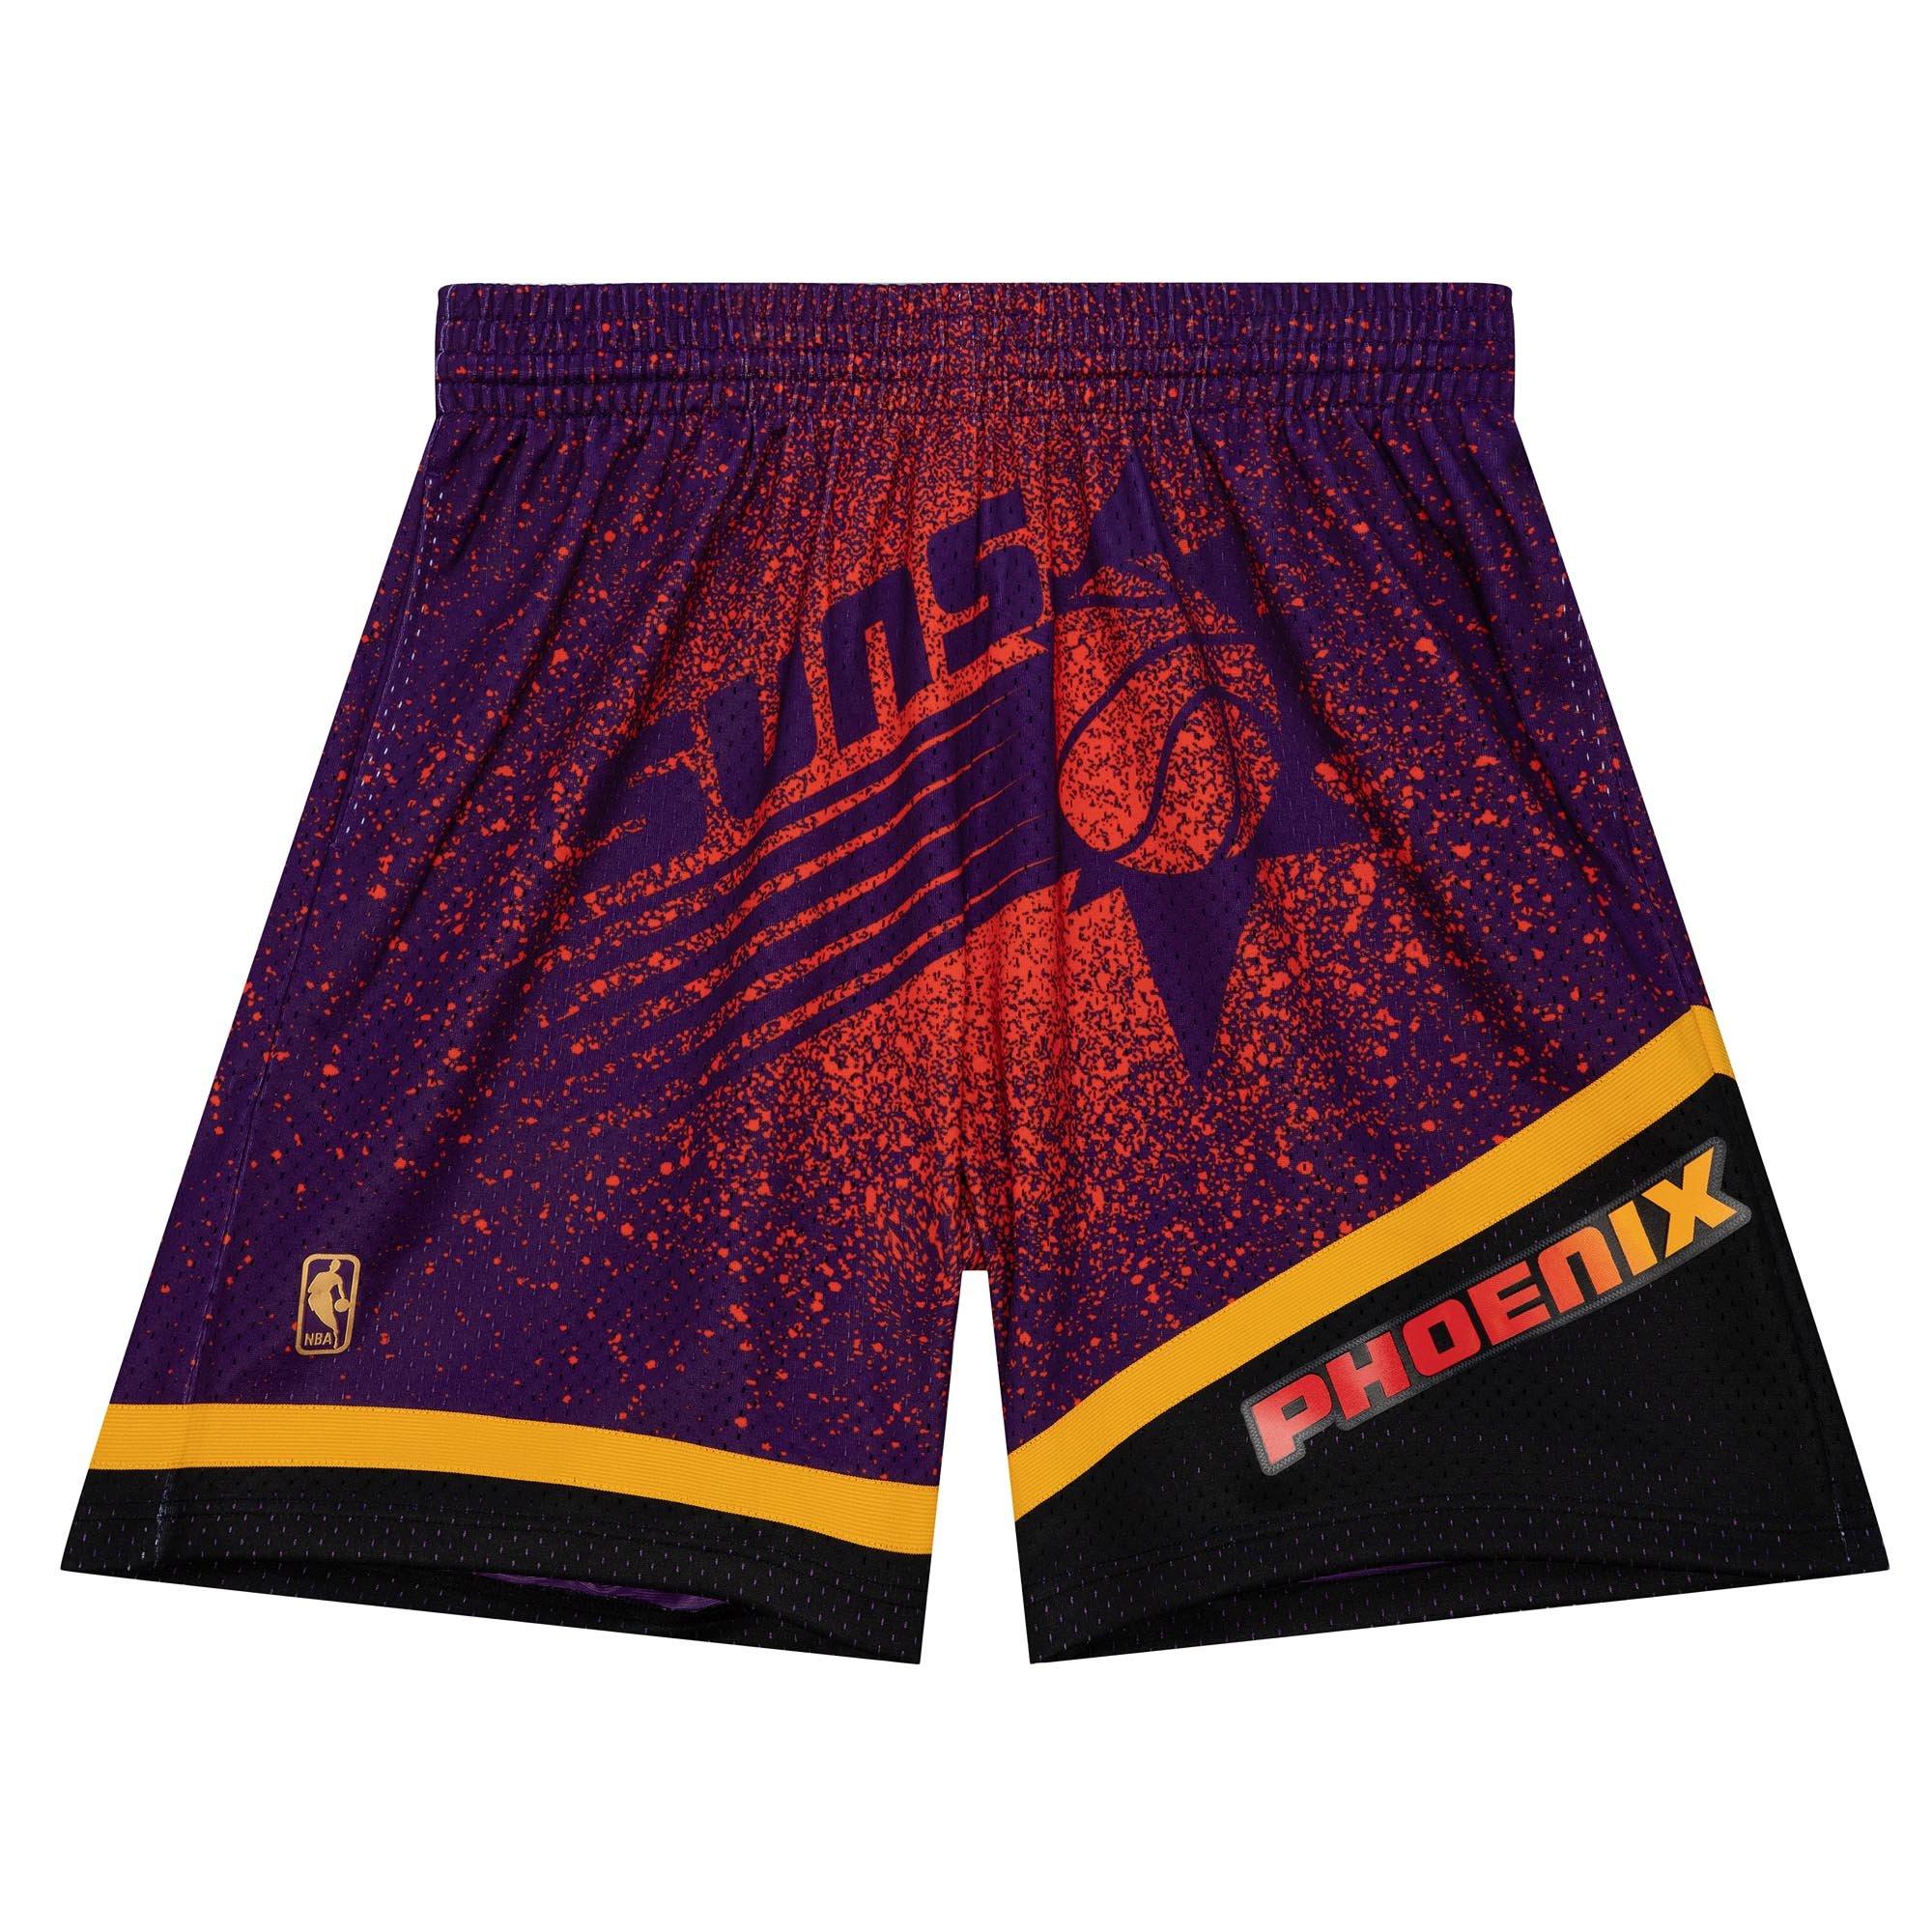 Hypebeast. Driving Culture Forward  Basketball shorts, Mitchell and ness  shorts, Basketball clothes